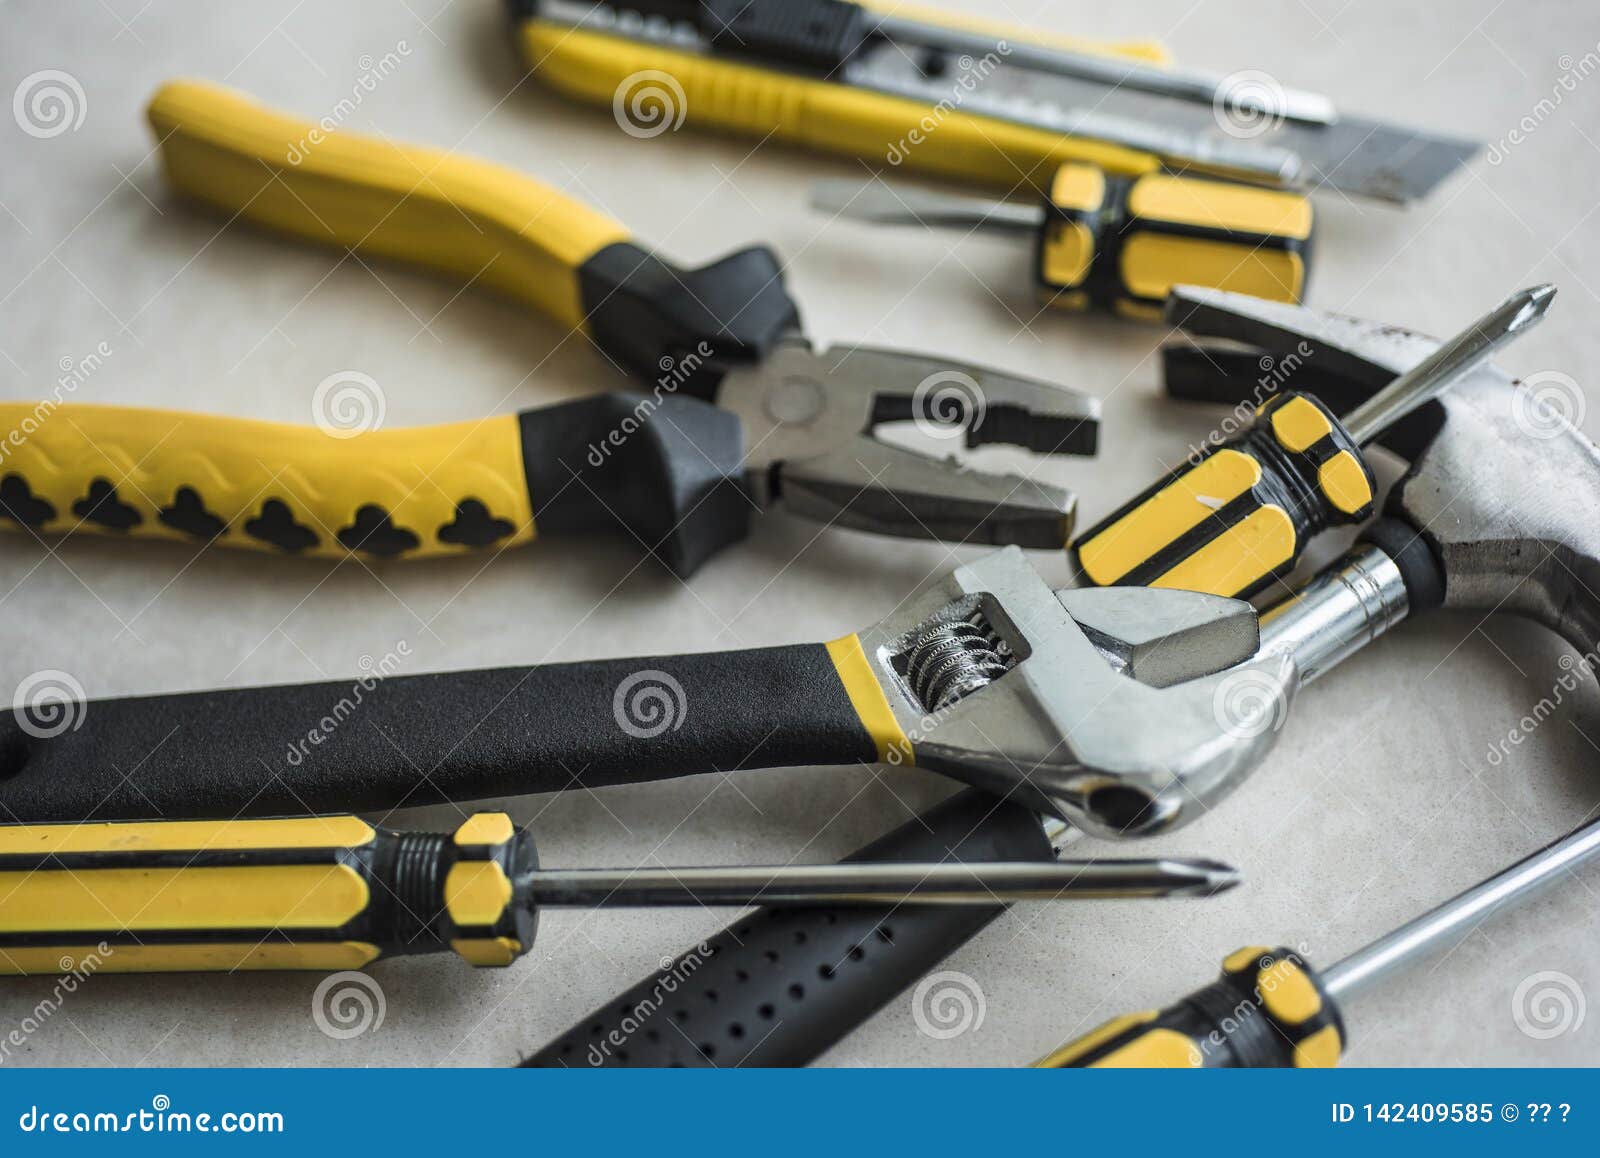 A Pile of Hardware Tools on a Solid Background Stock Image - Image of  knife, yellow: 142409585